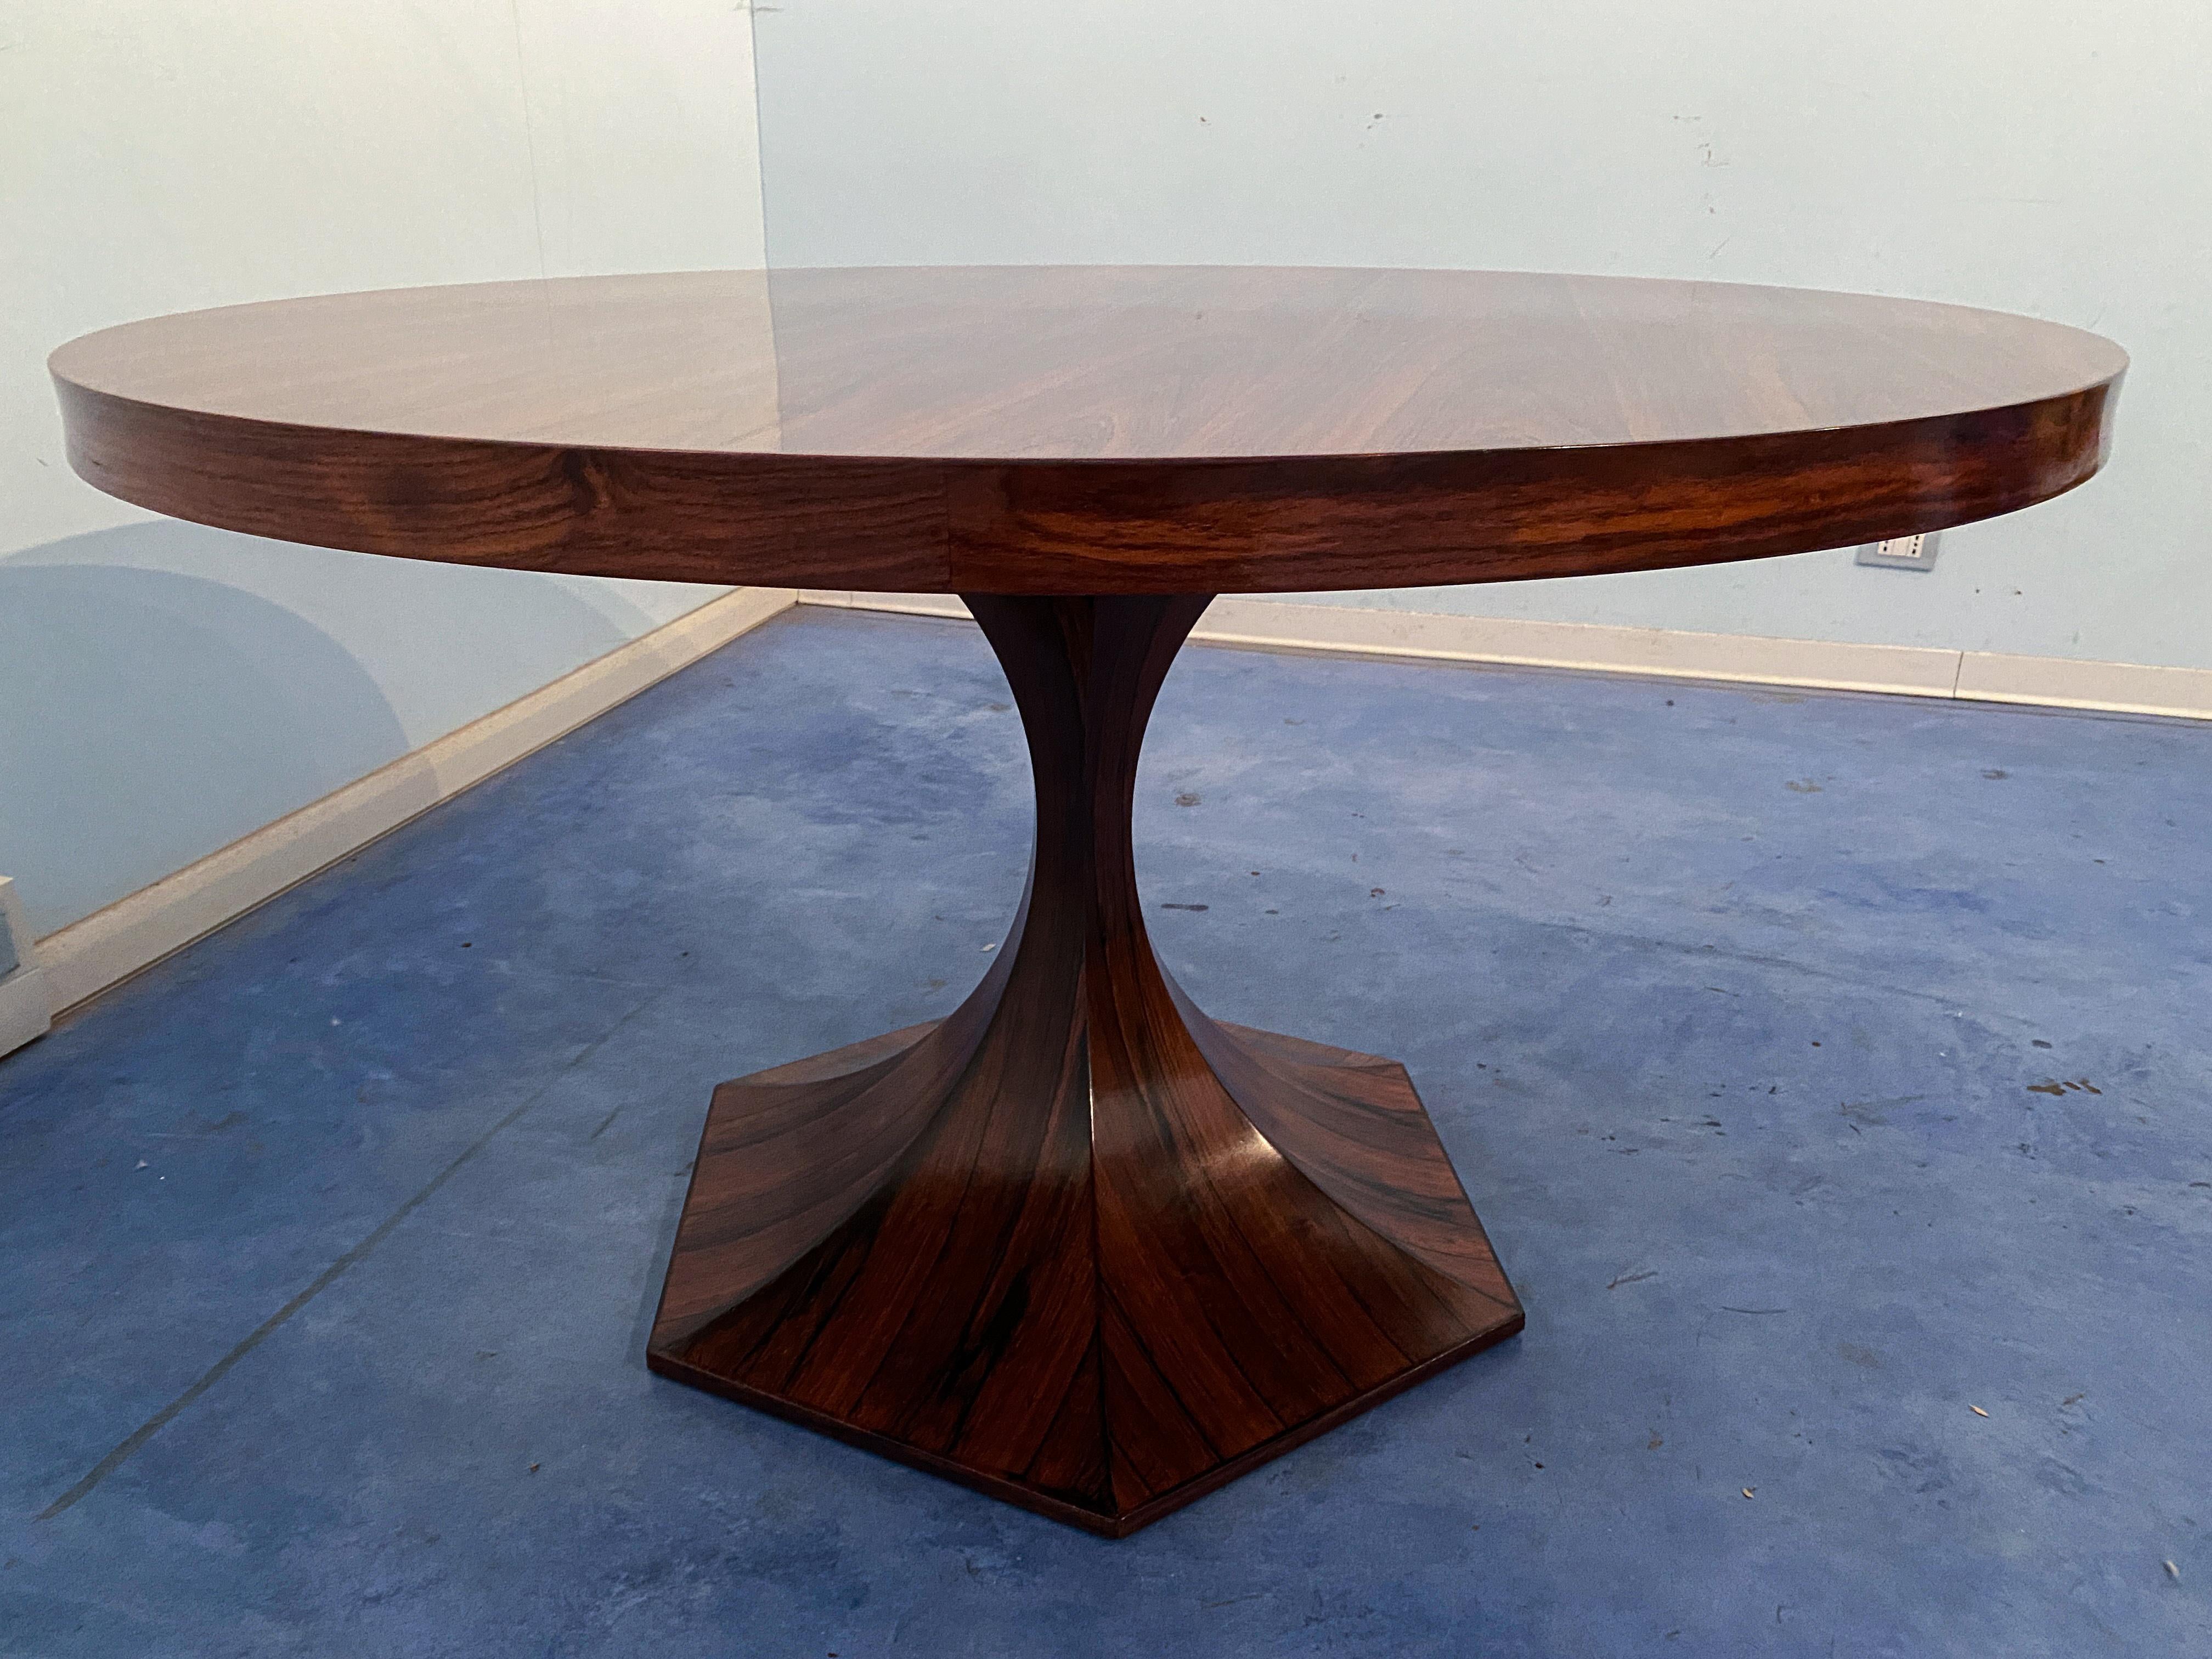 Italian Midcentury Circular Dining Table in Mahogany by Giulio Moscatelli, 1964 For Sale 1